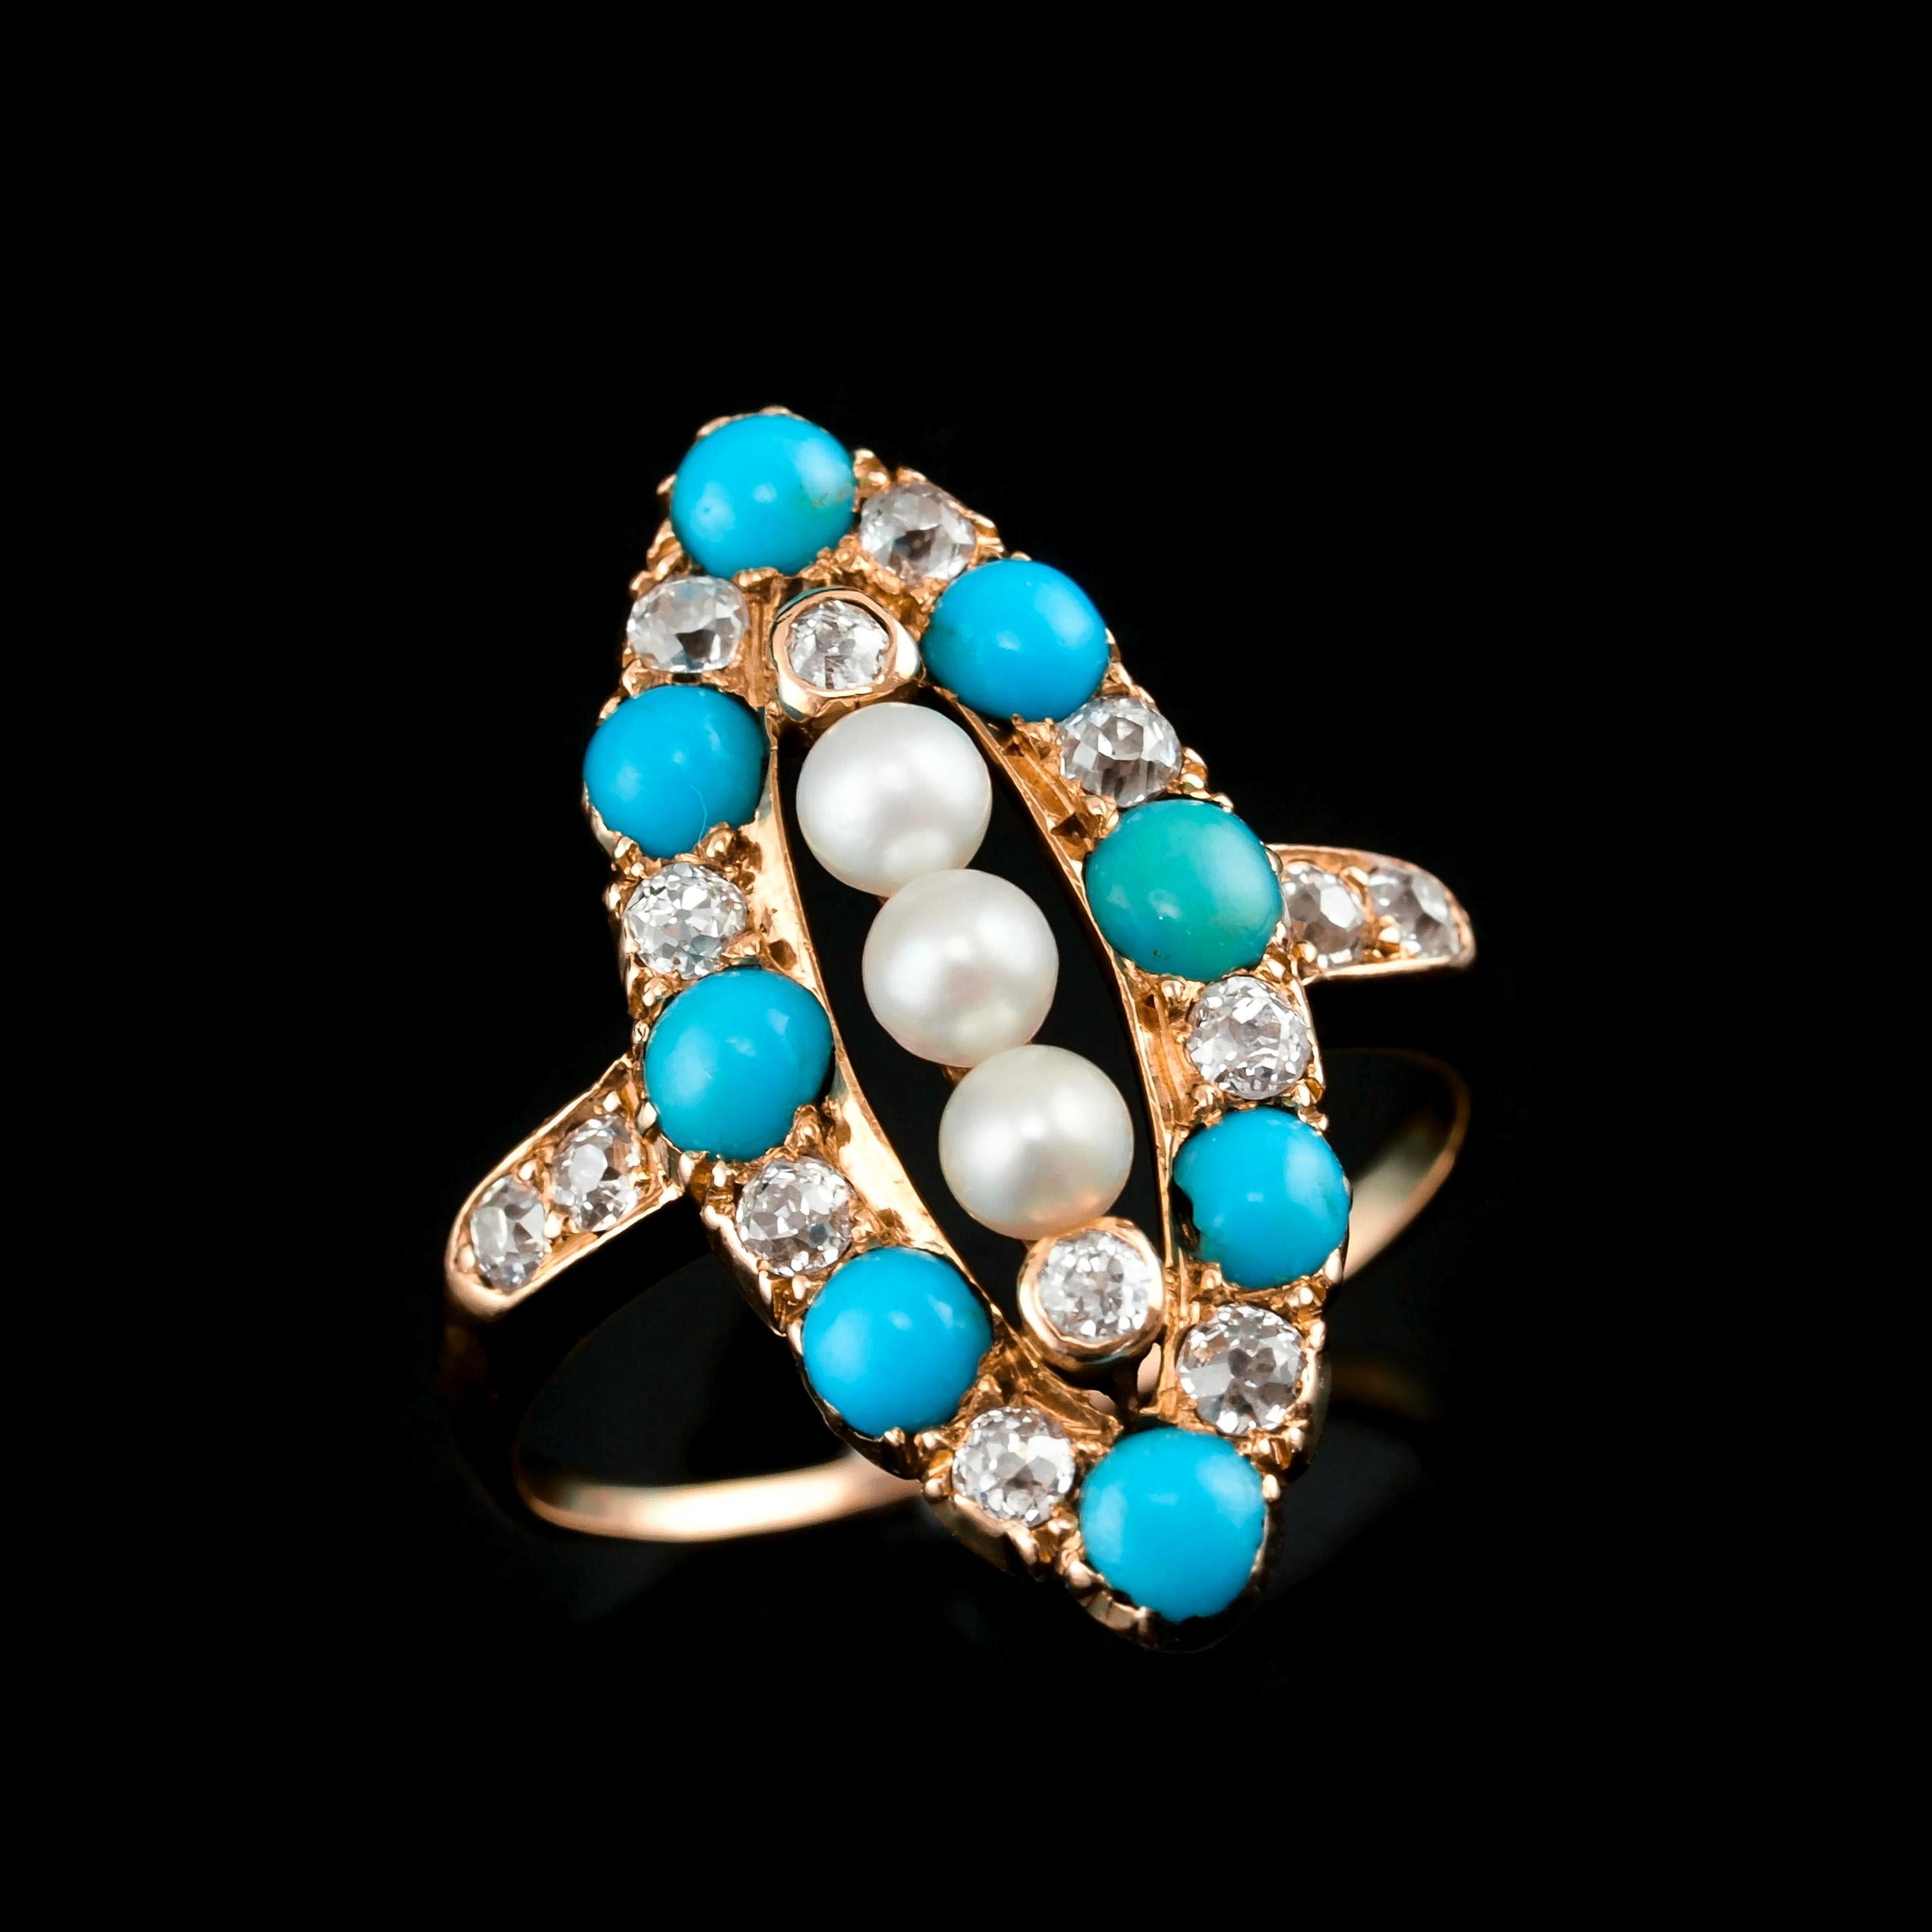 Antique Victorian Diamond Pearl Turquoise 18K Gold Ring Navette/Marquise c.1880 In Good Condition For Sale In London, GB